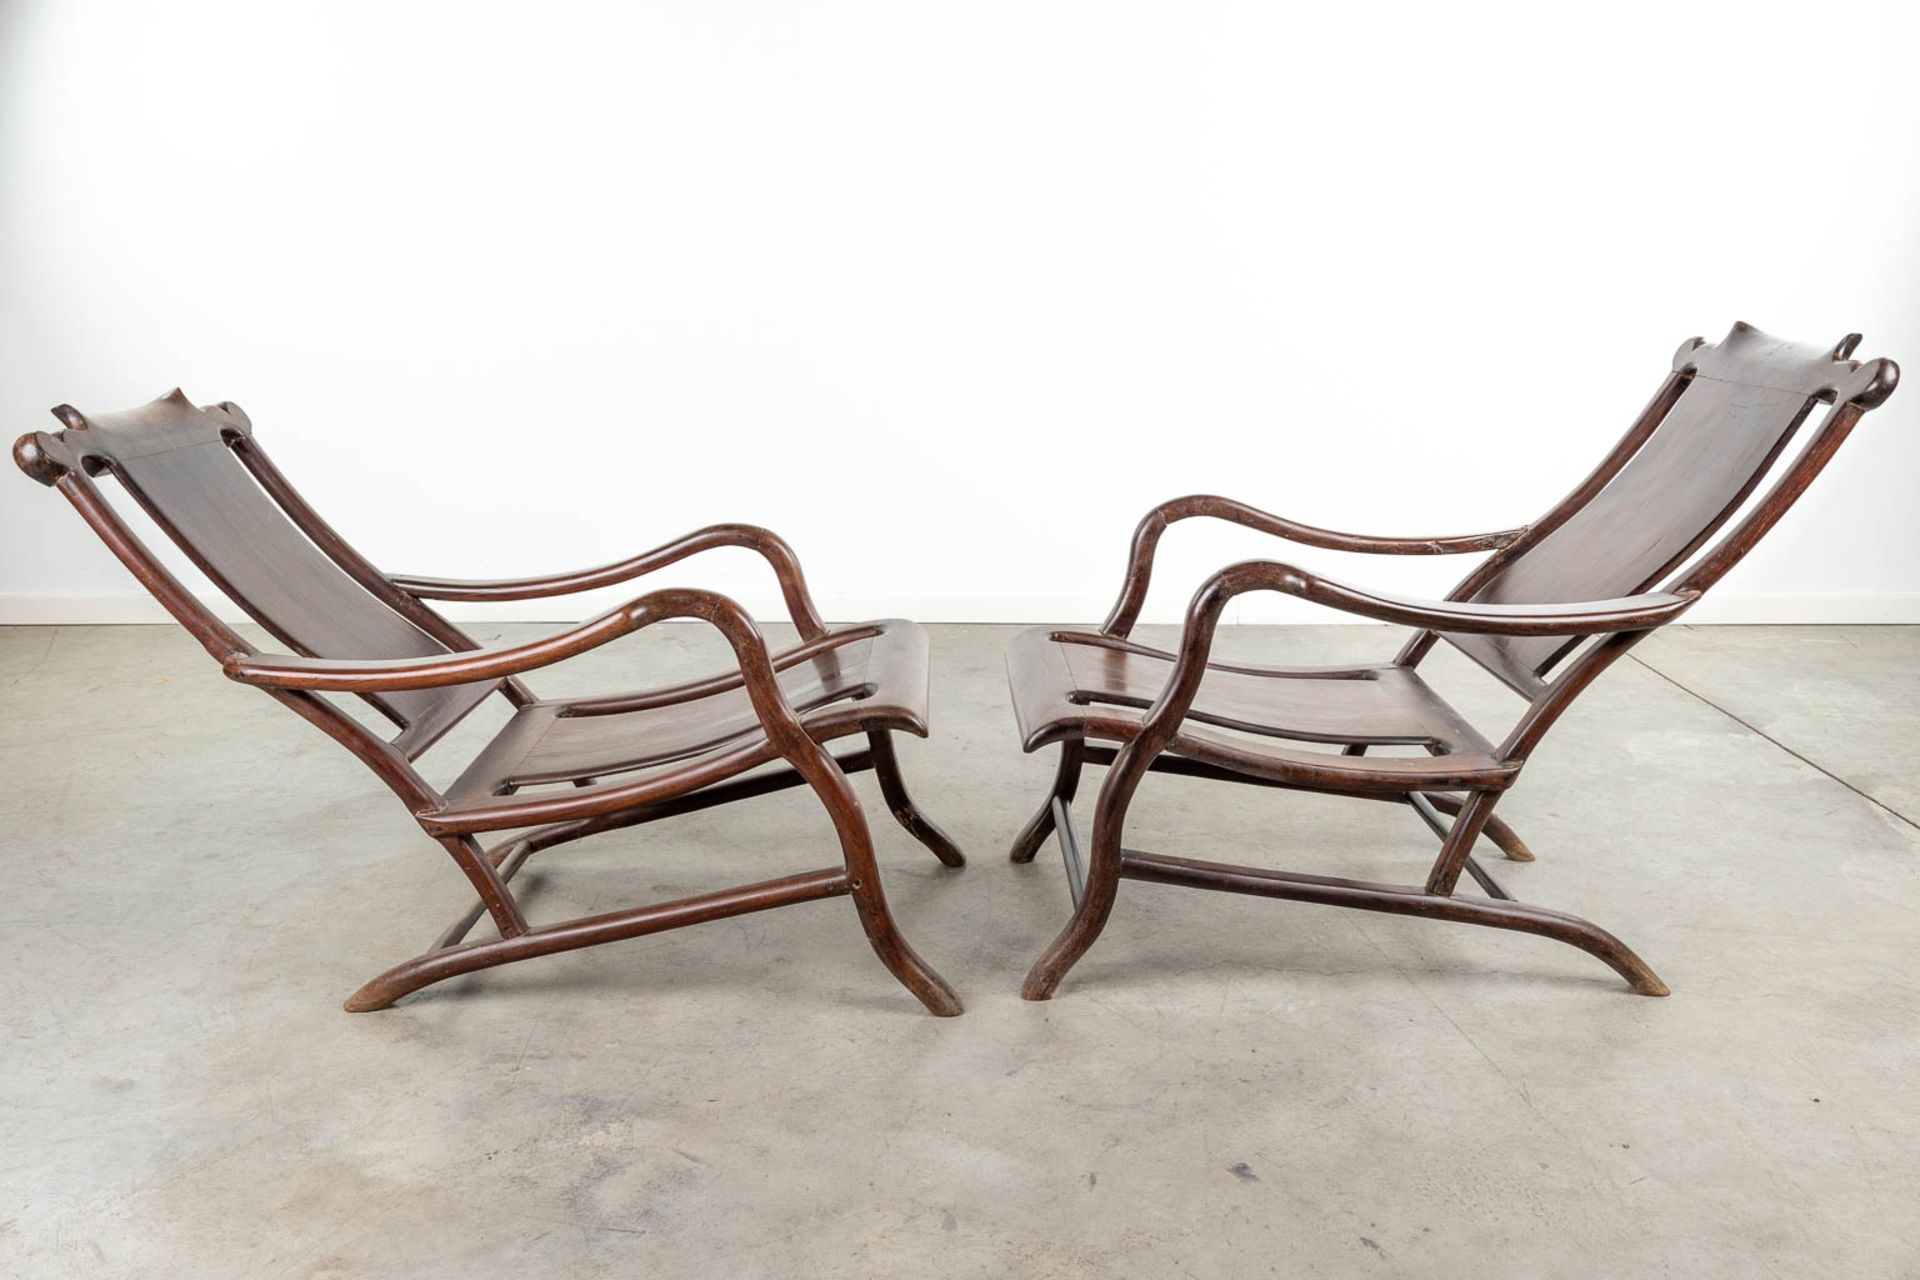 A pair of Chinese hardwood armchairs. (L: 100 x W: 57 x H: 78 cm) - Image 6 of 8